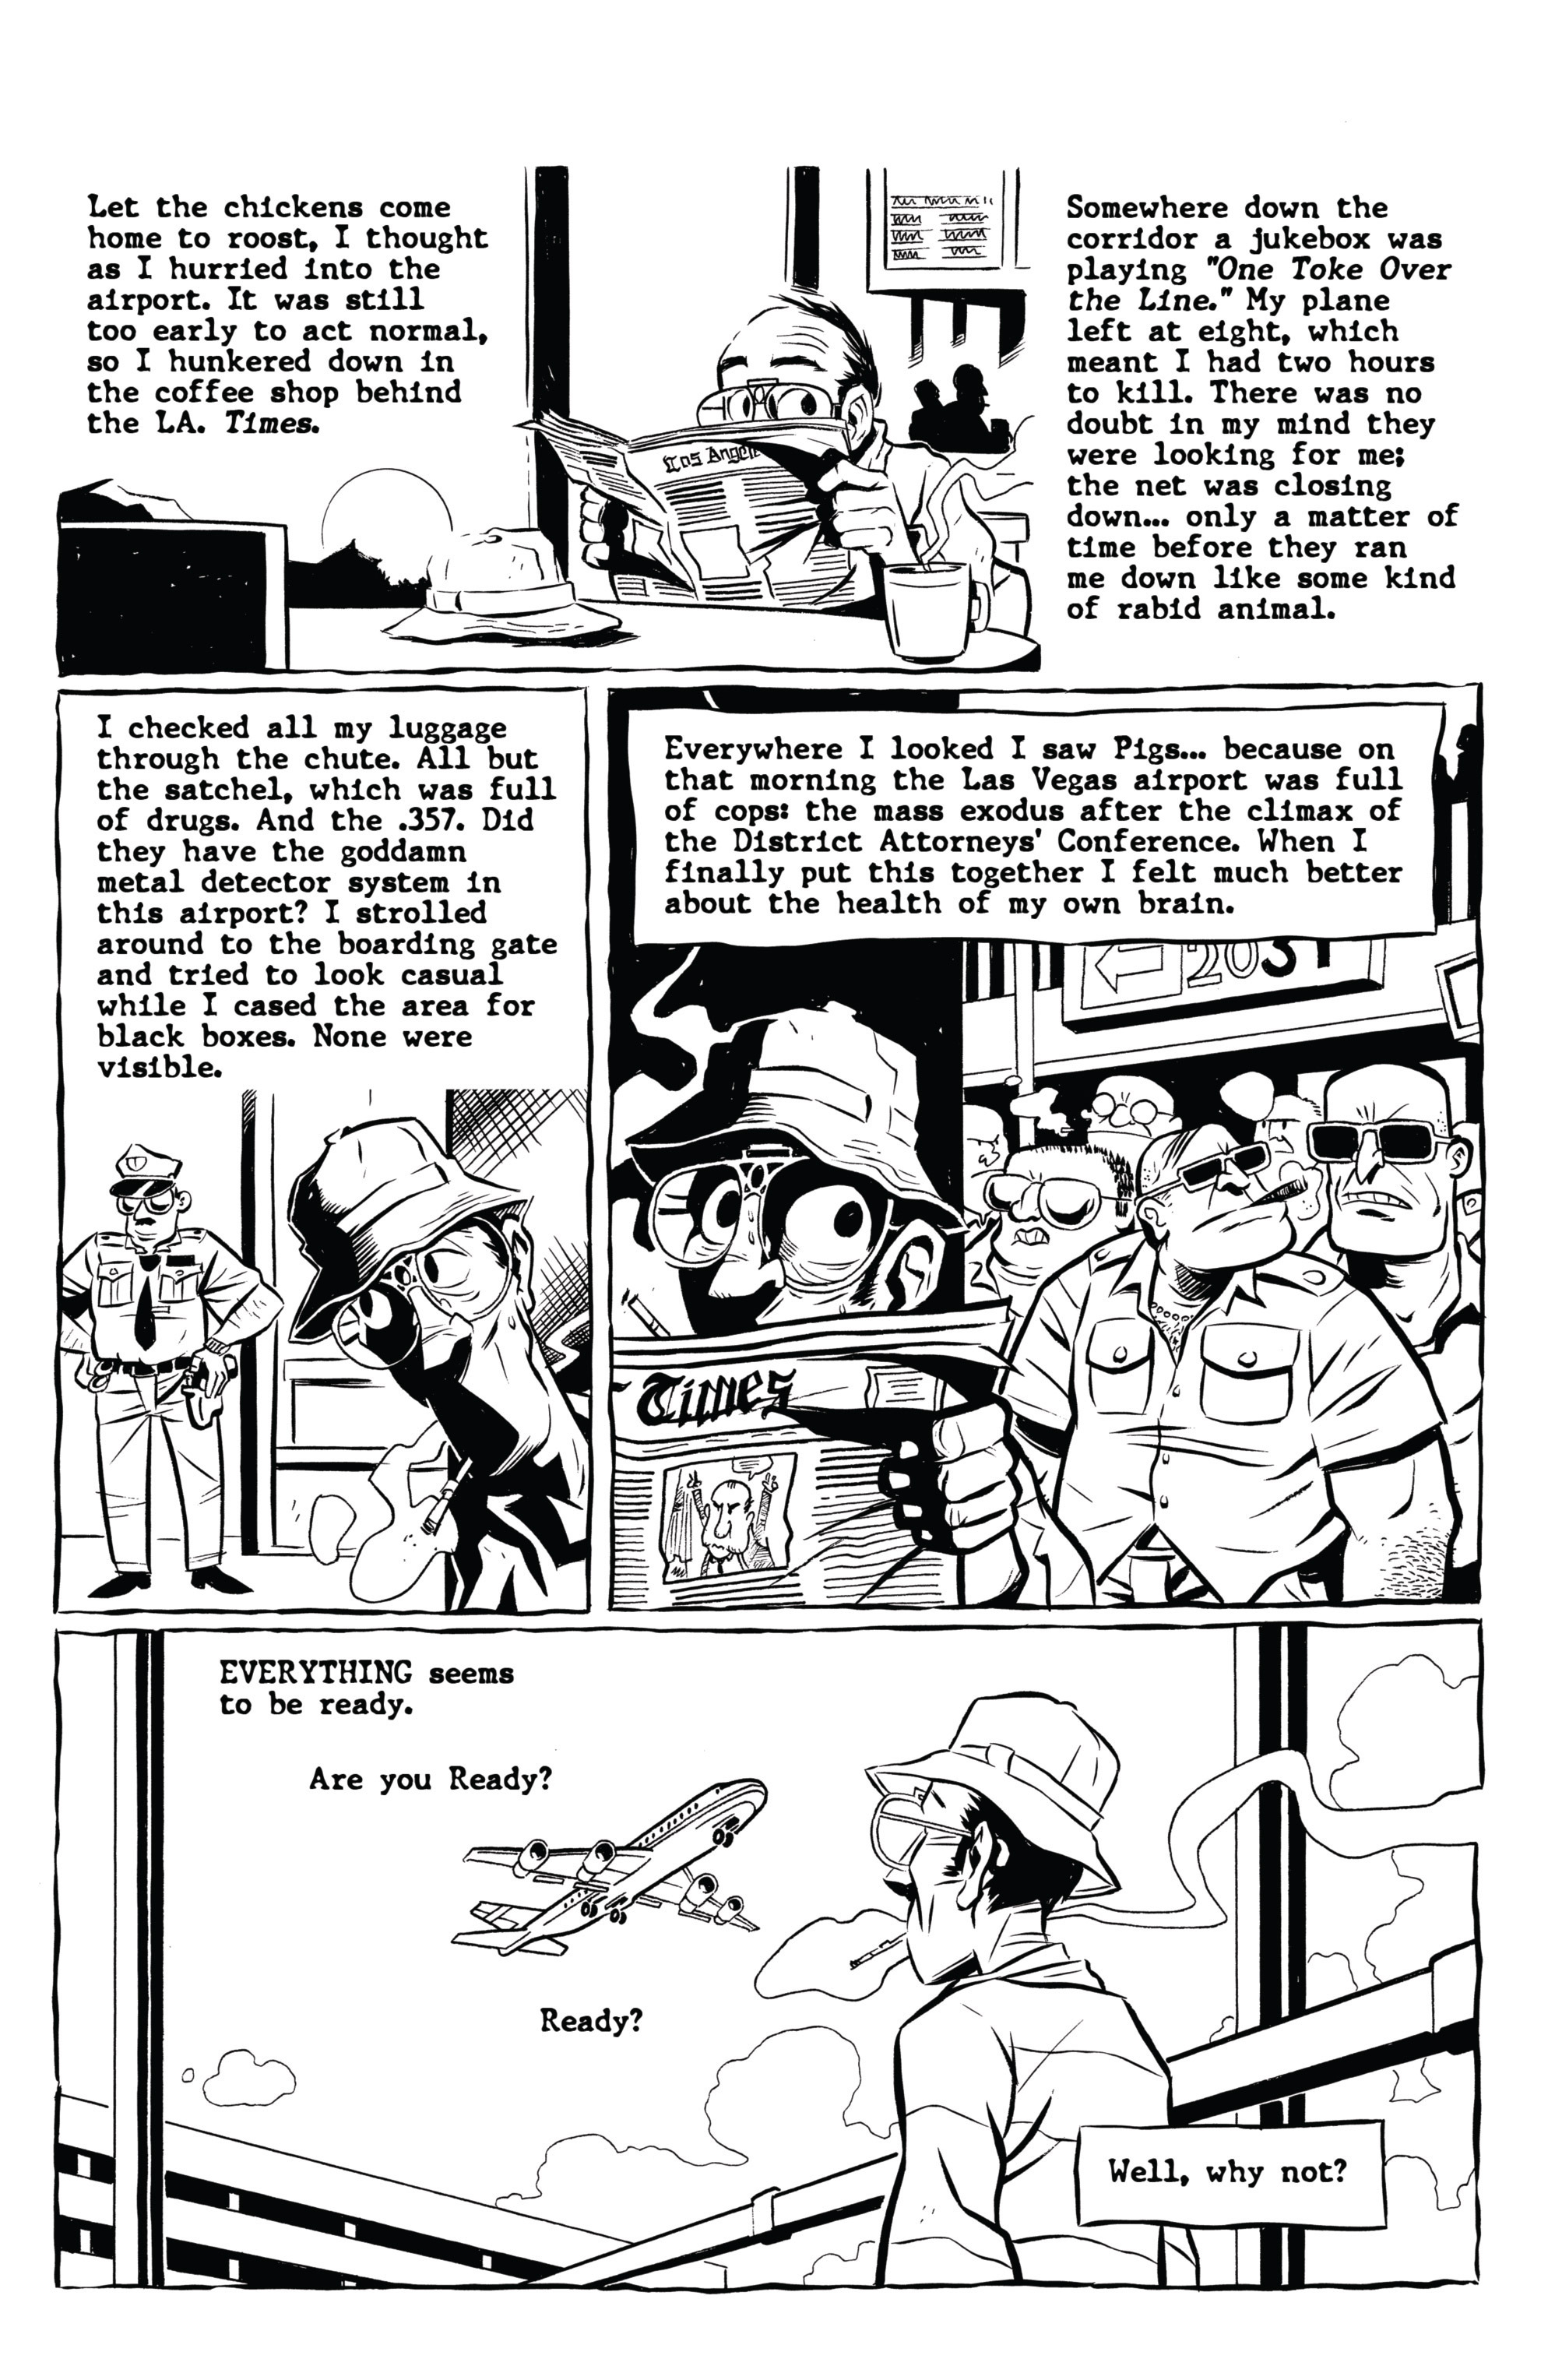 Read online Hunter S. Thompson's Fear and Loathing in Las Vegas comic -  Issue #4 - 39